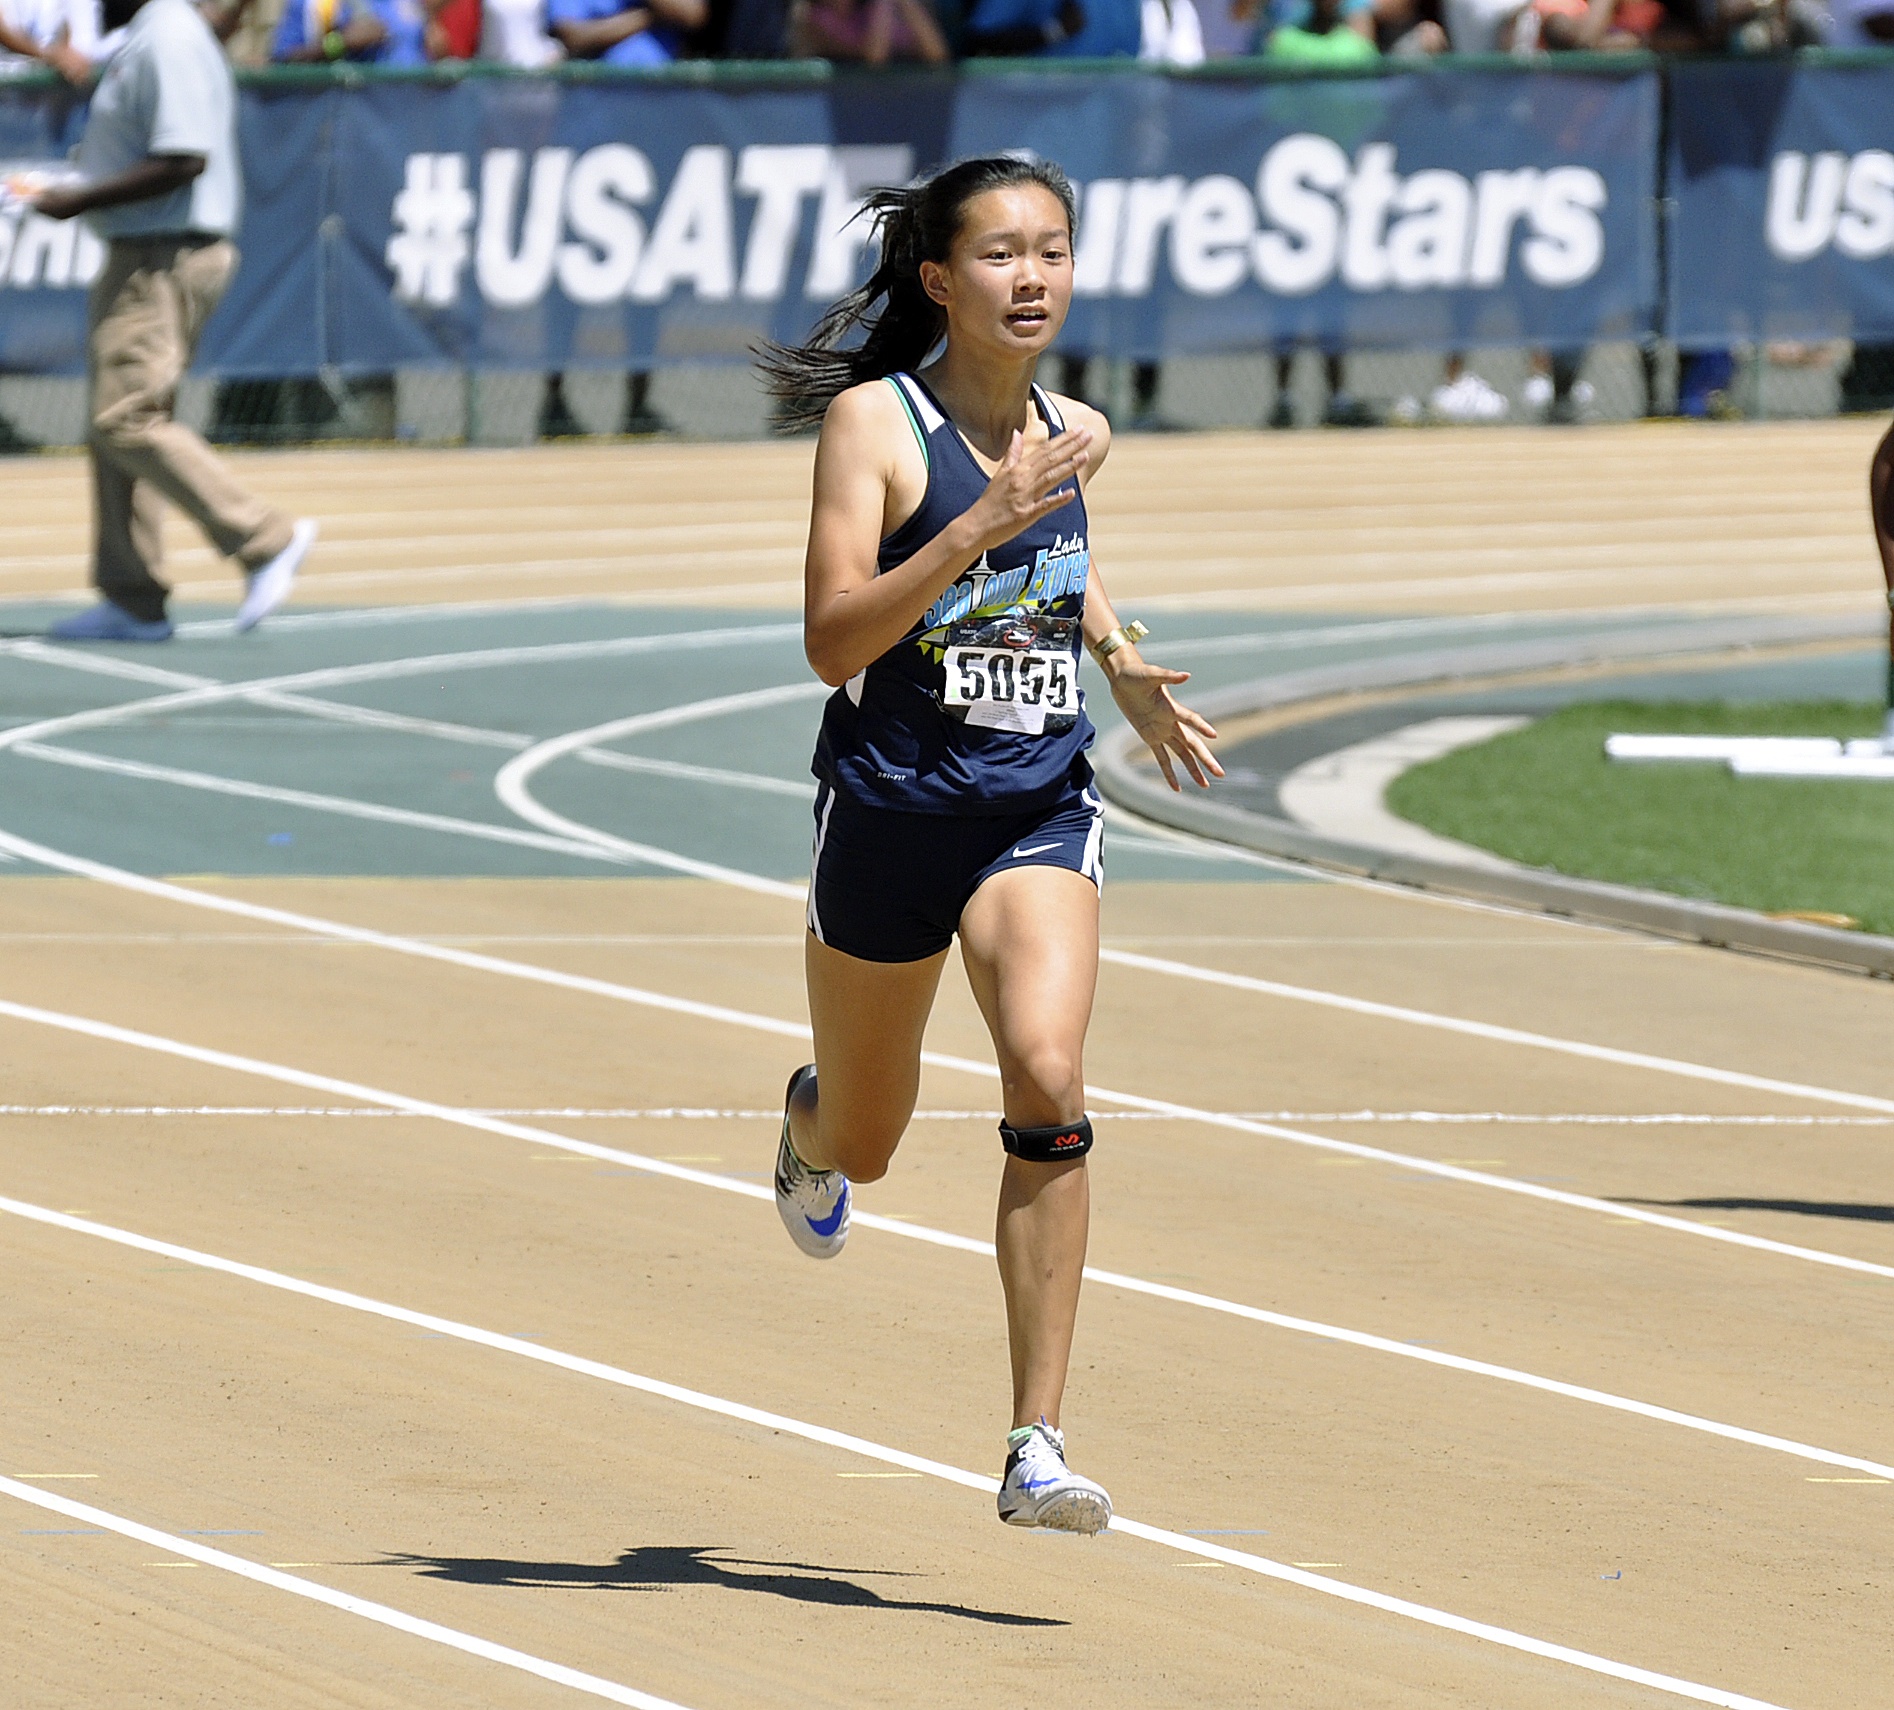 Islander Kayla Lee competed in the 200 and 400 meter events at the Junior Olympic national championships